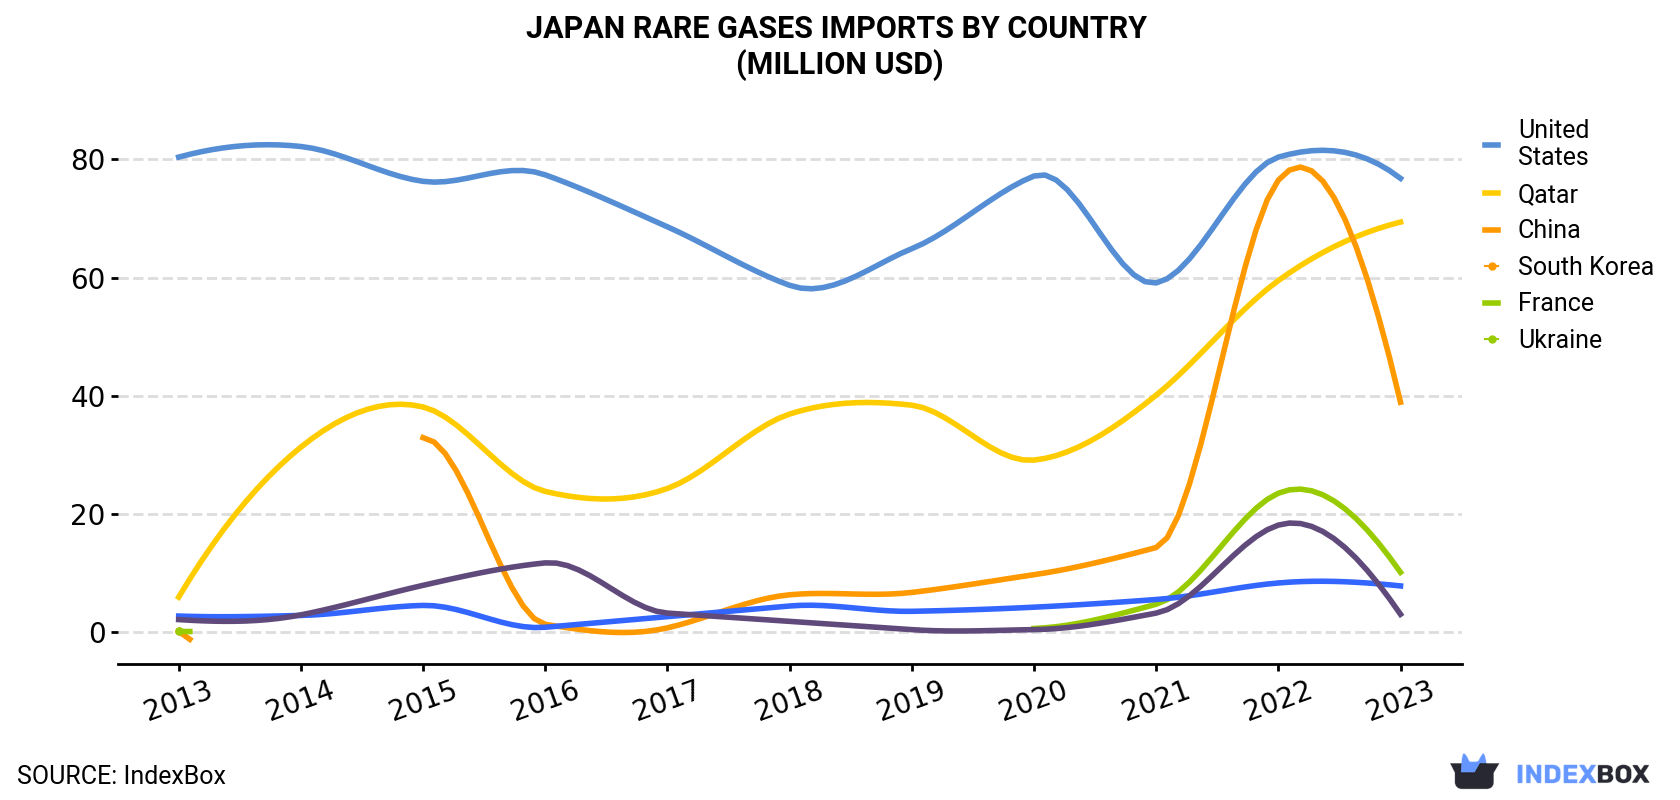 Japan Rare Gases Imports By Country (Million USD)